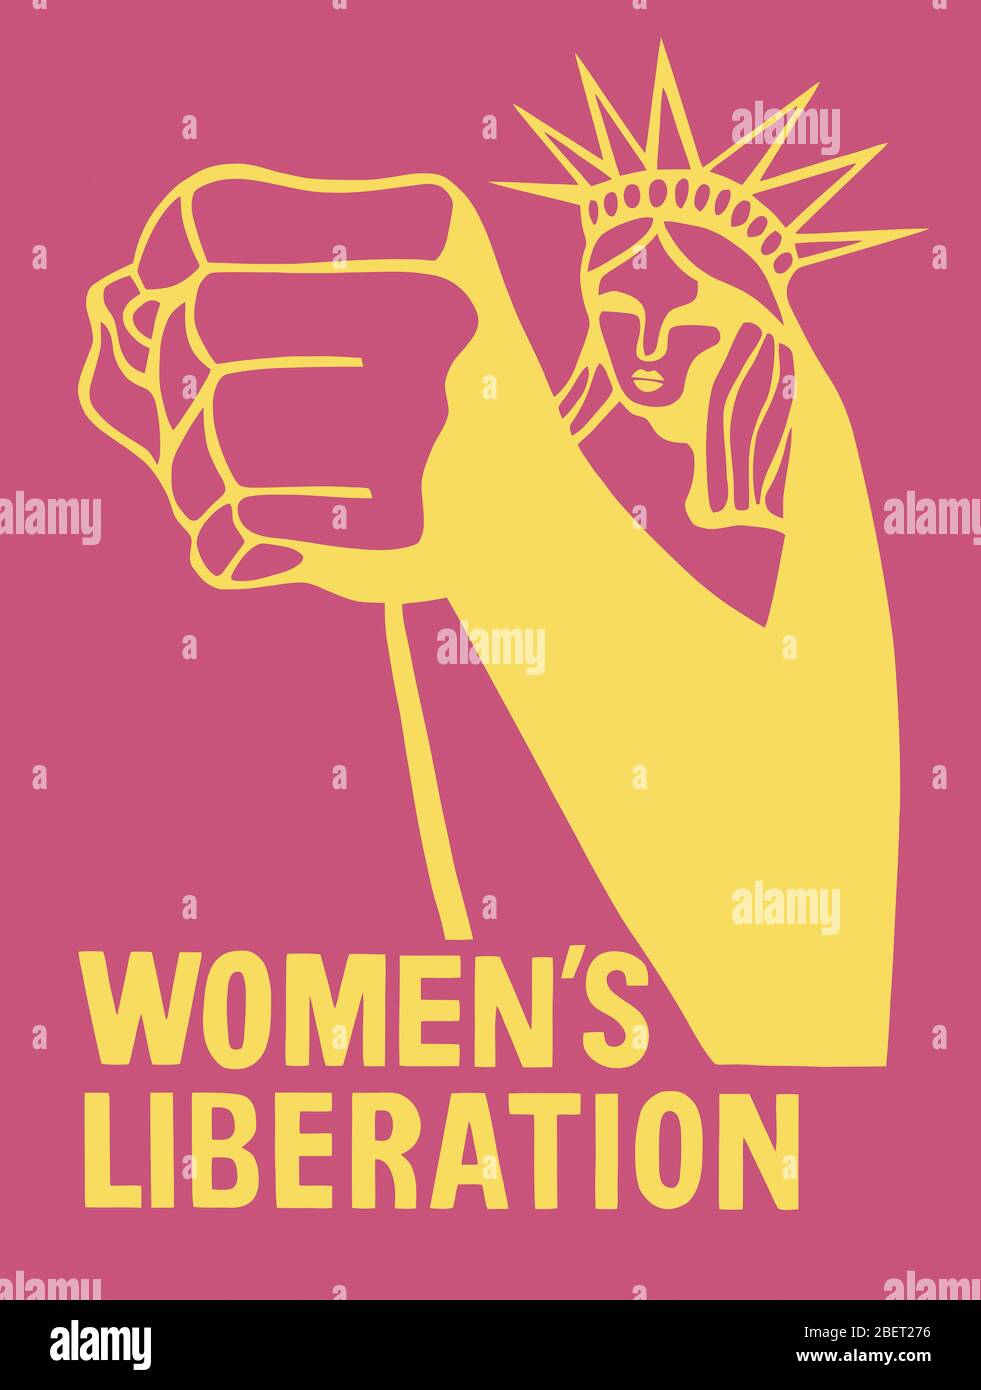 Retro history print features the sentiment underlying Women's Liberation Movement. Stock Photo